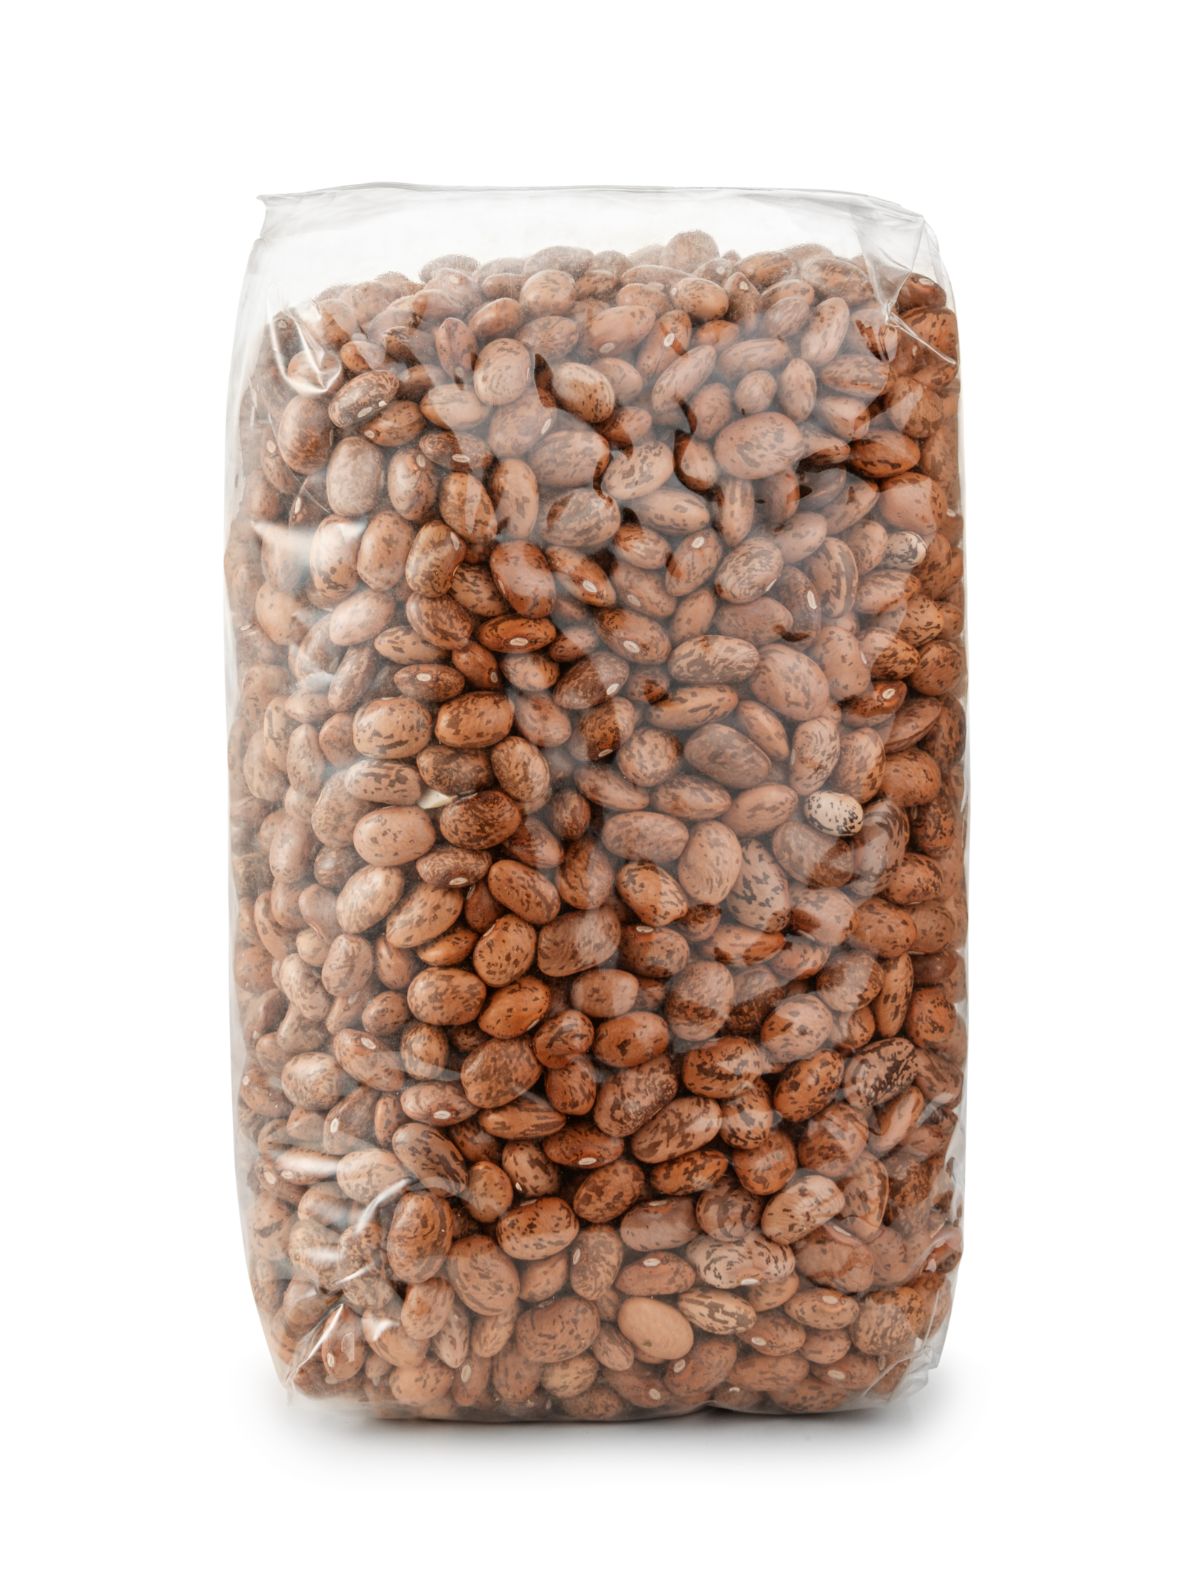 A jar full of pantry beans that can be planted to grow more